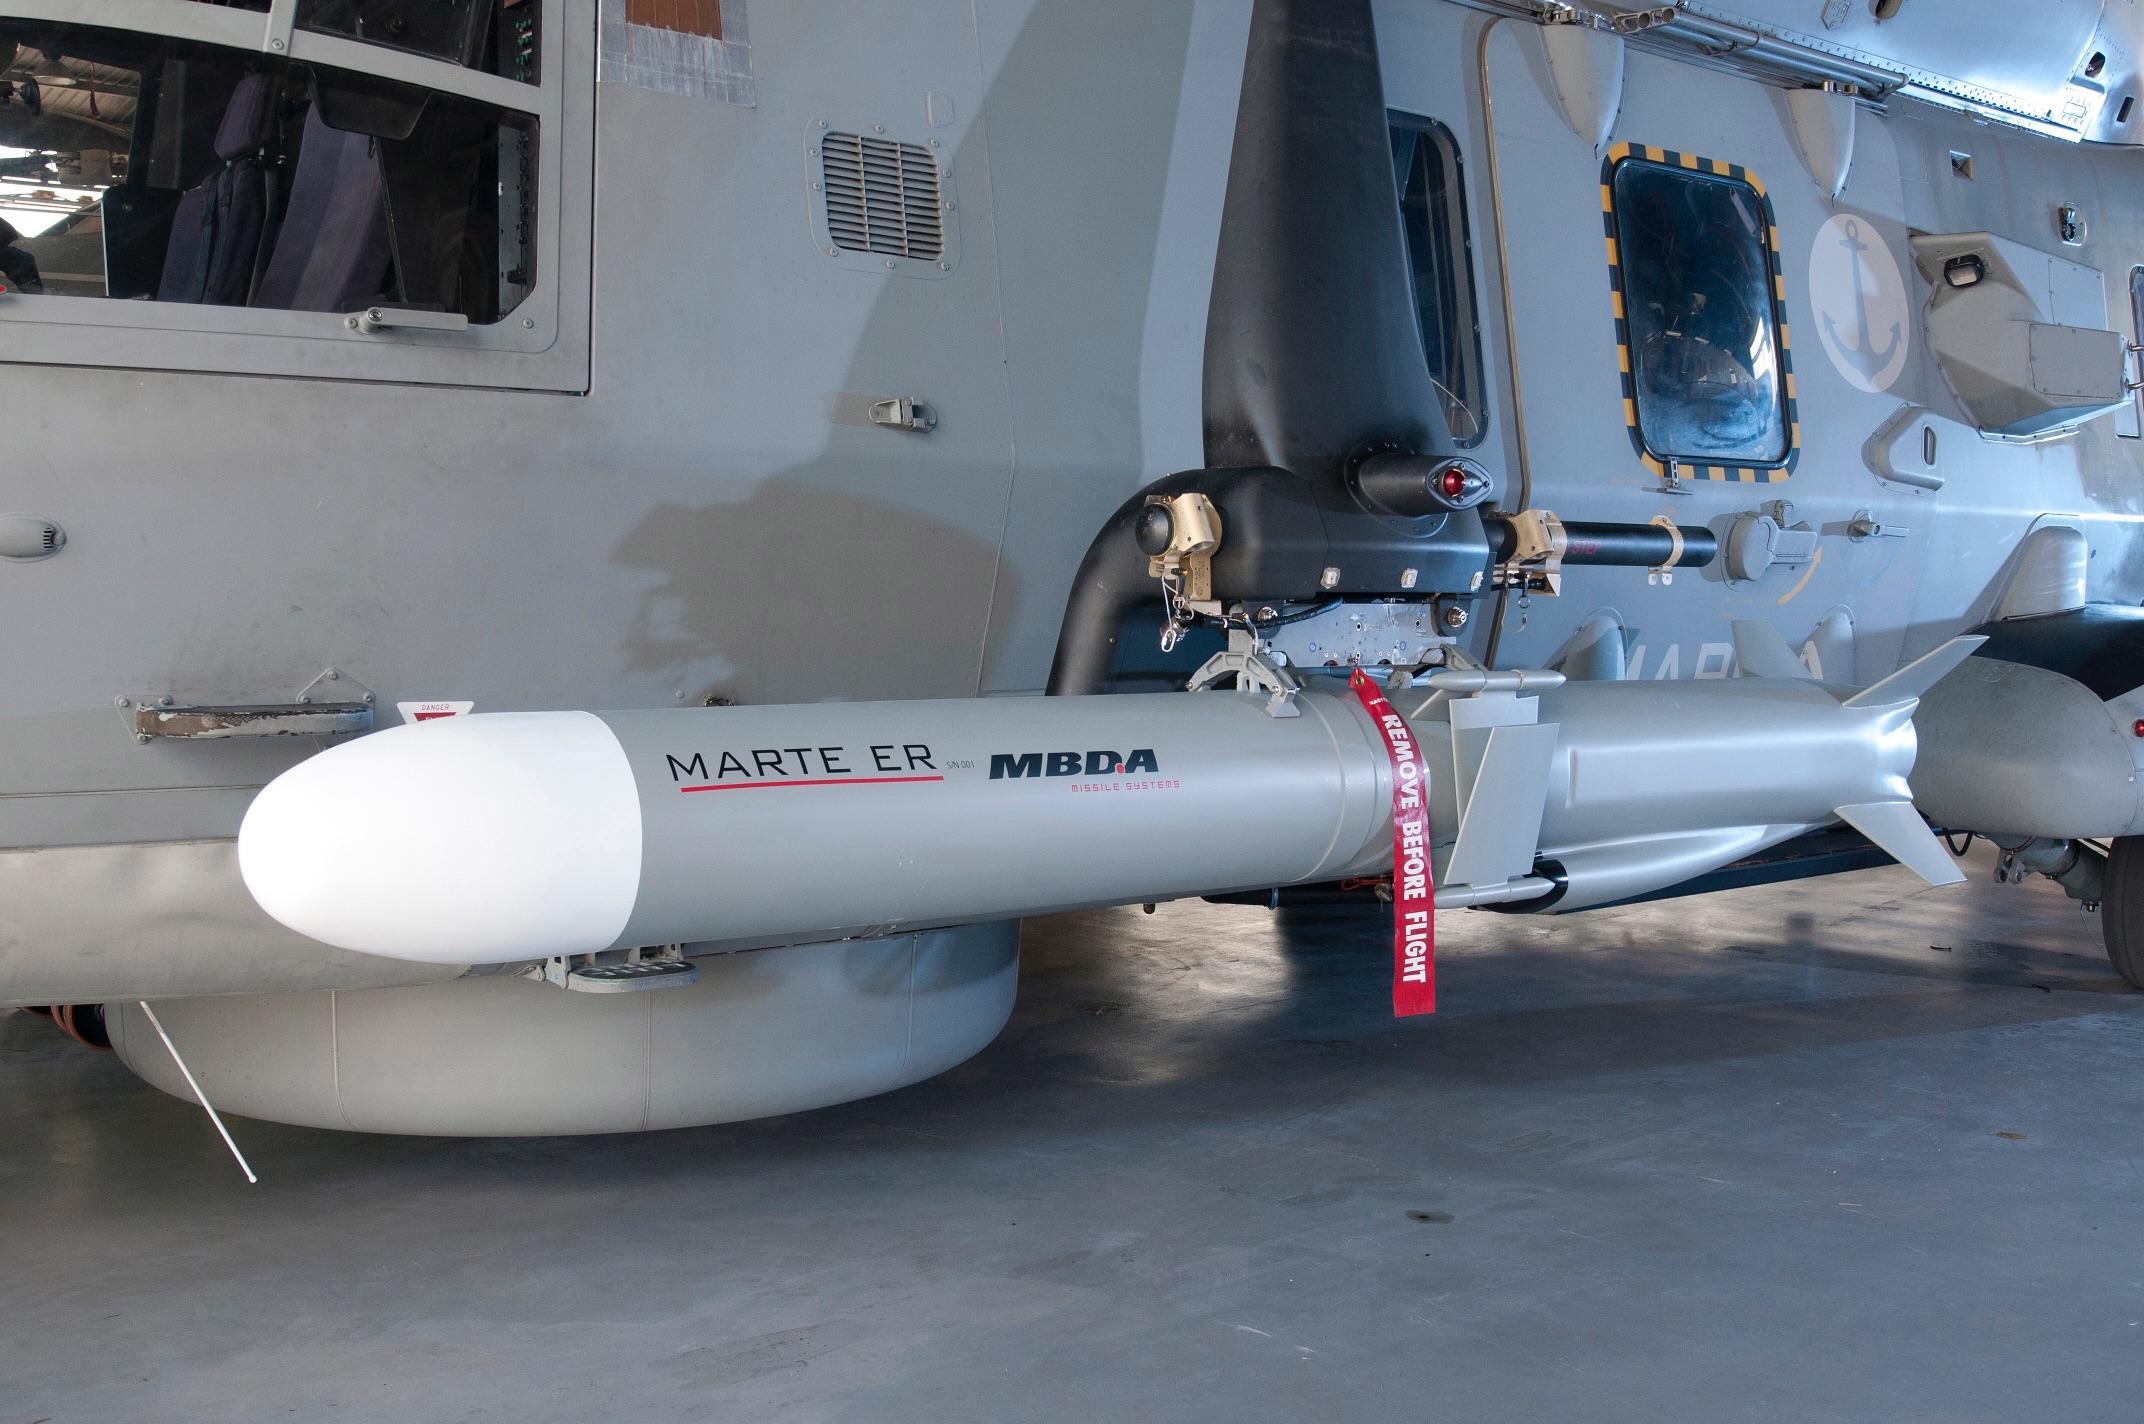 MBDA signs contract to supply more Marte ER anti-ship missile to Qatar - Newsroom MBDA